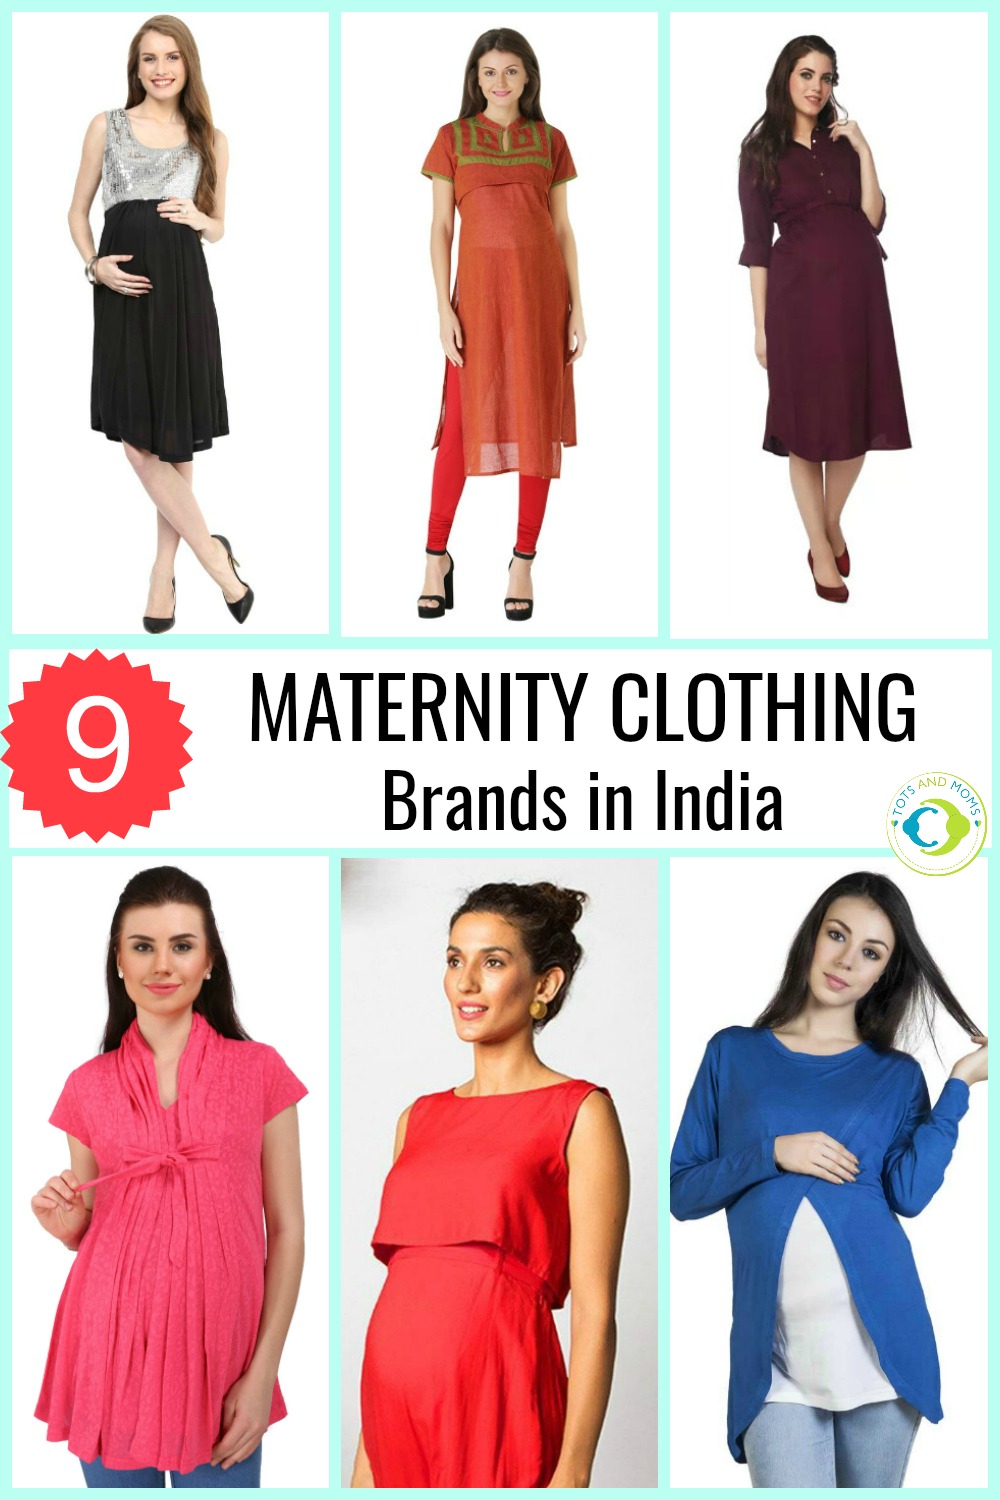 Pregnancy clothes: Where to buy maternity clothes